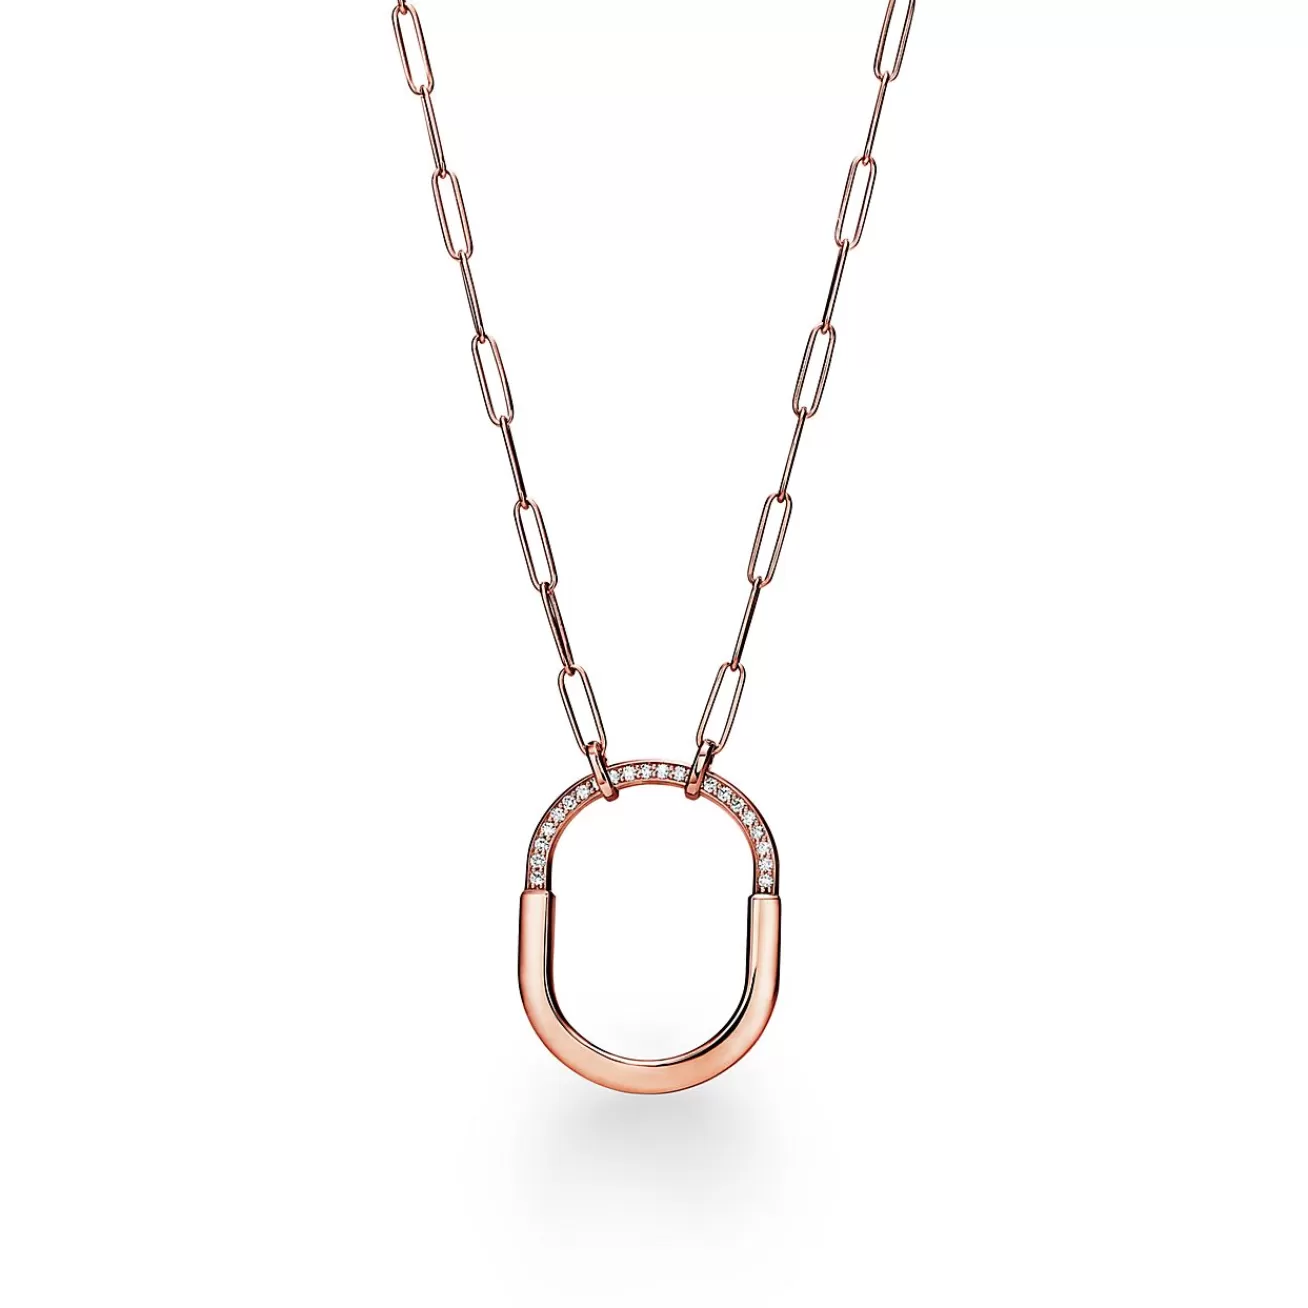 Tiffany & Co. Tiffany Lock Pendant in Rose Gold with Diamonds, Large | ^ Necklaces & Pendants | Rose Gold Jewelry